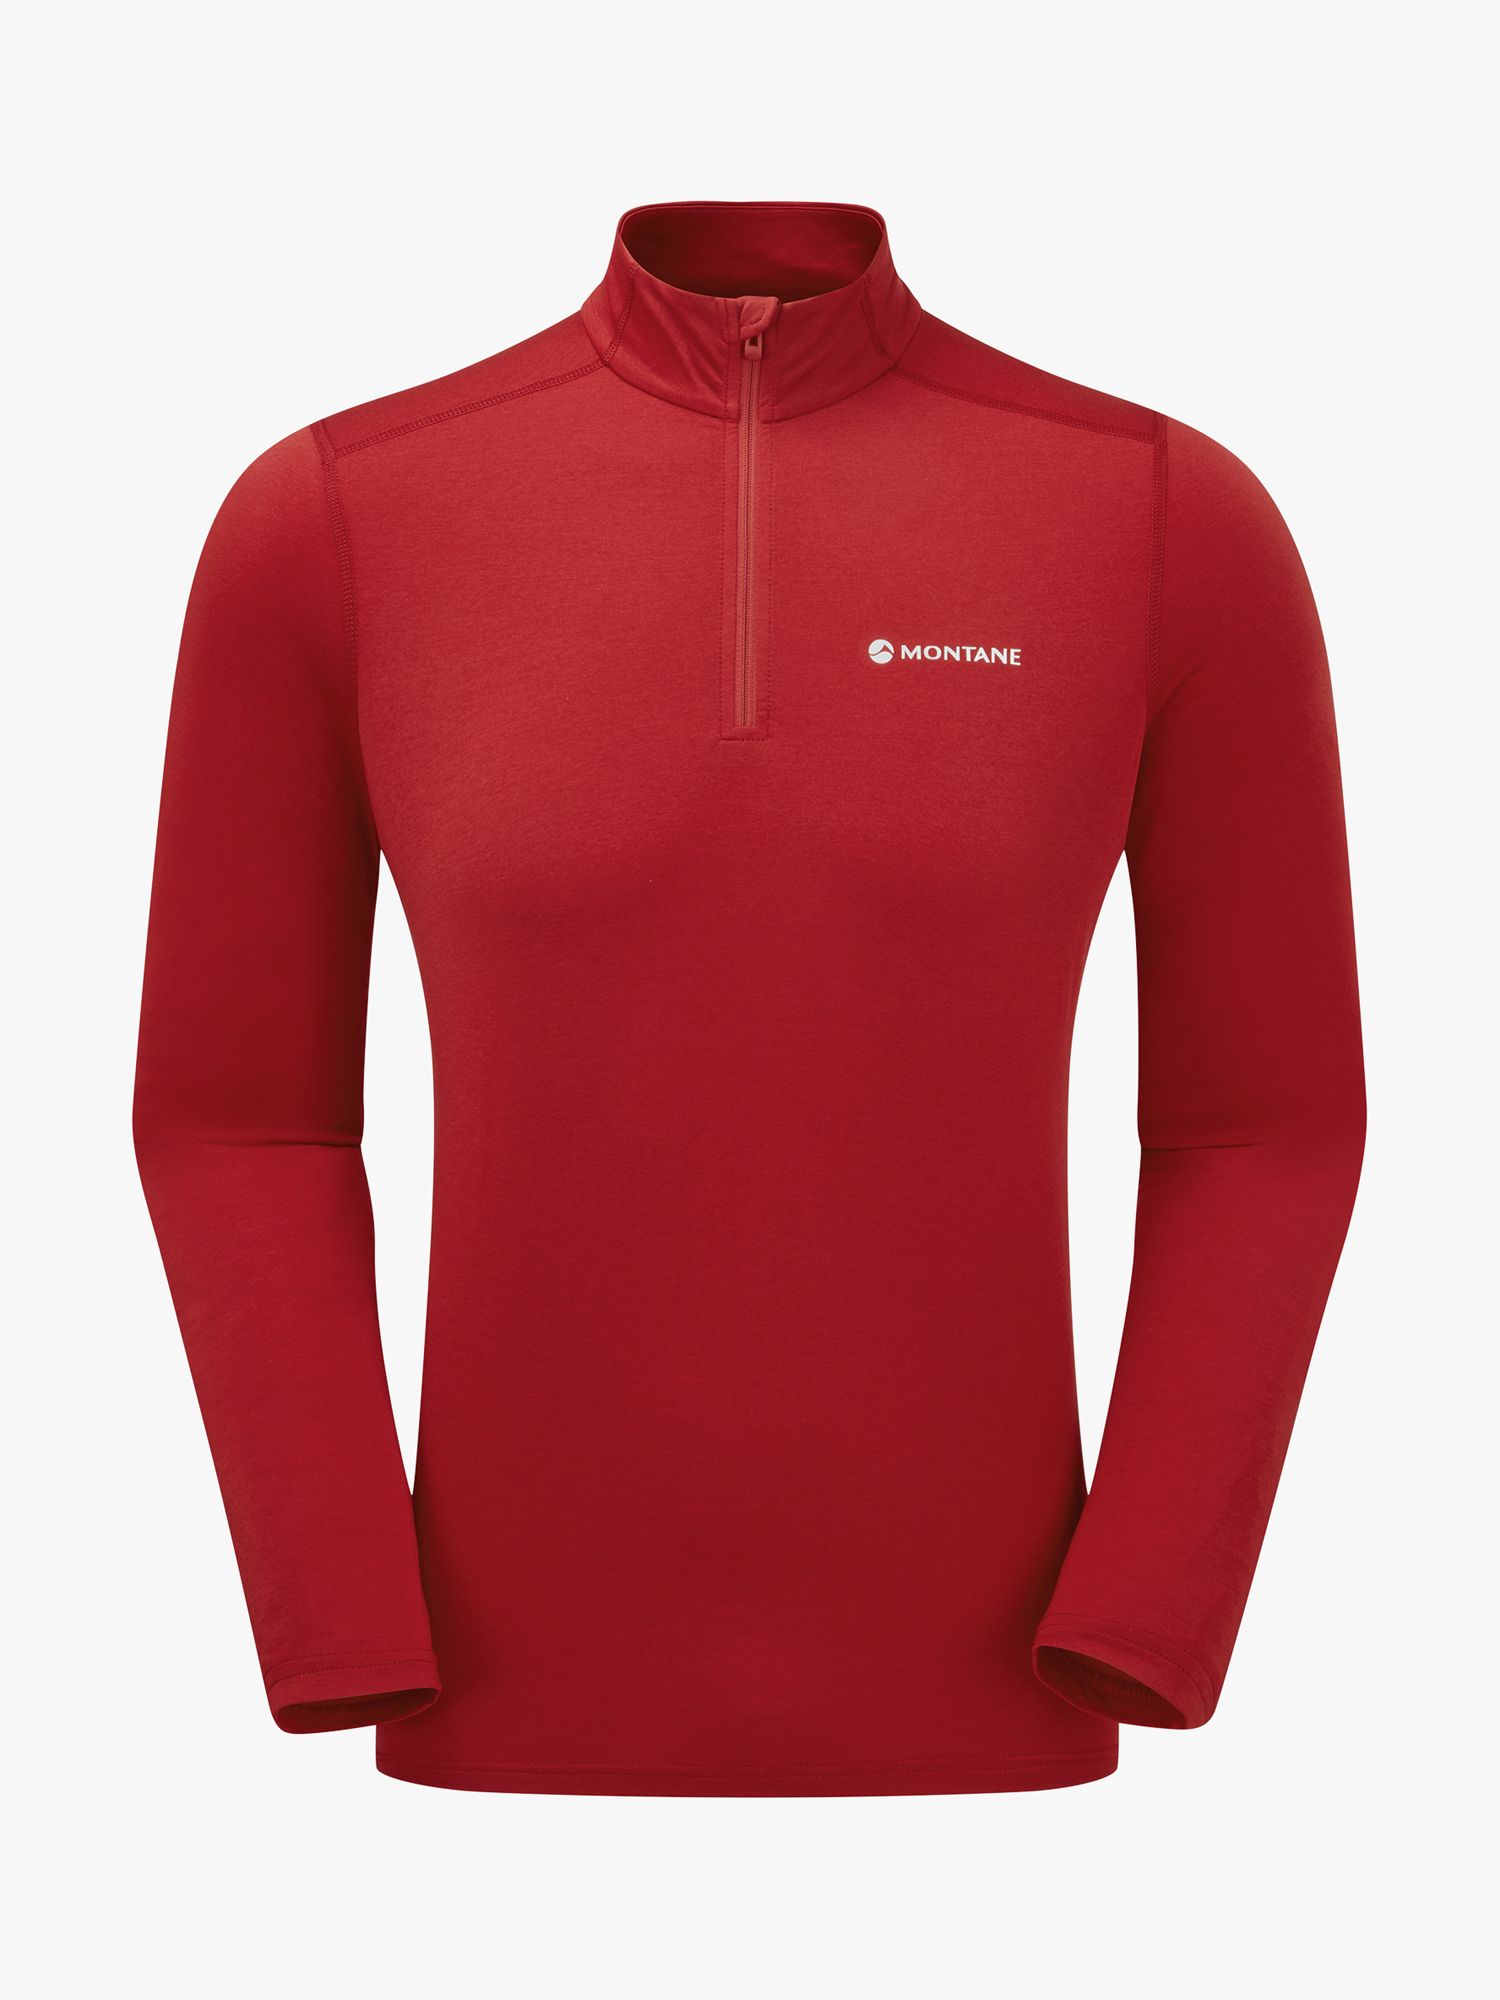 Montane Dart XT Thermal Zip Neck Long Sleeved Top, Acer Red, S